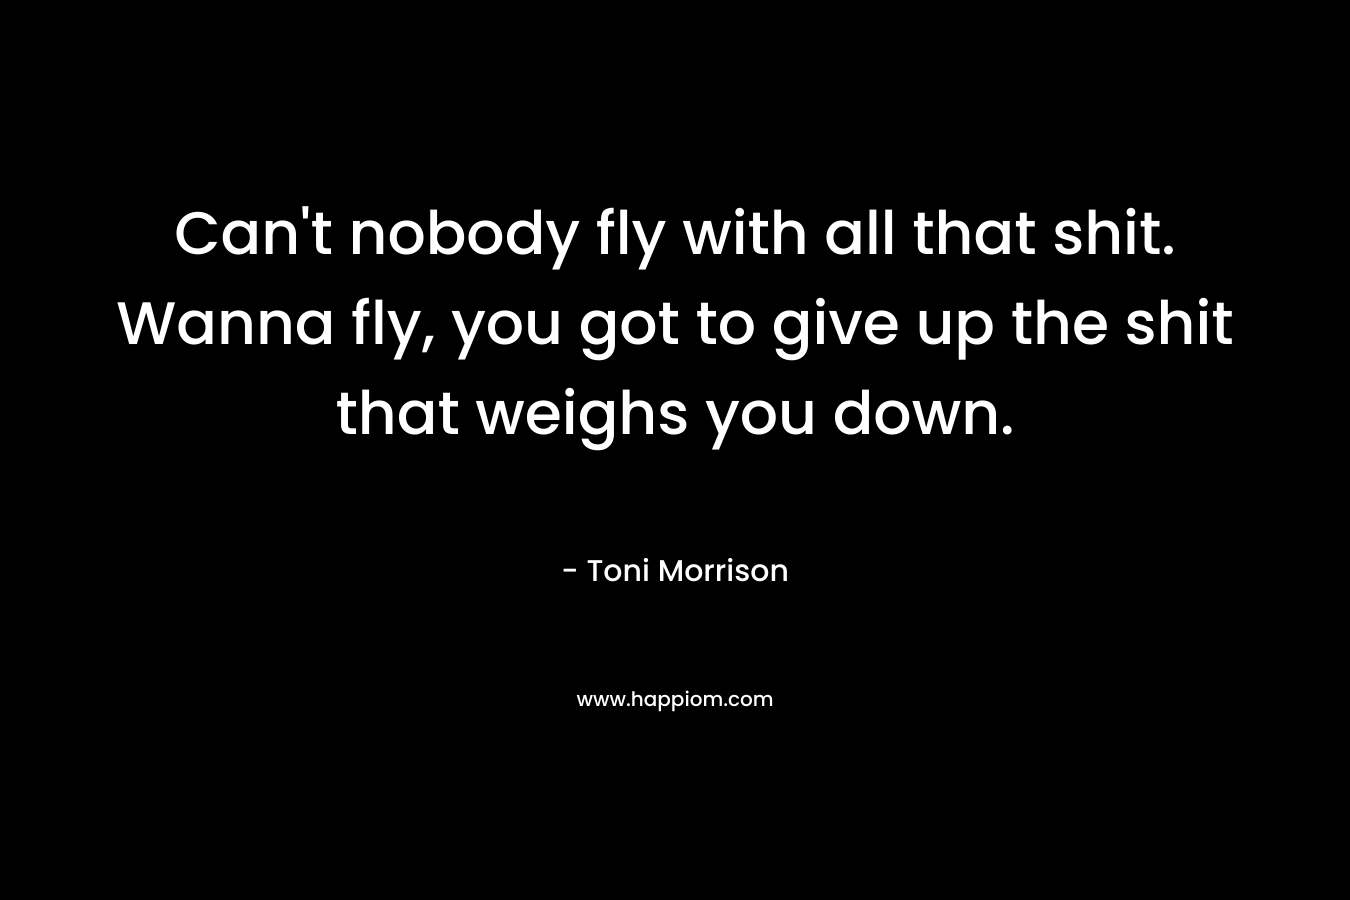 Can't nobody fly with all that shit. Wanna fly, you got to give up the shit that weighs you down.